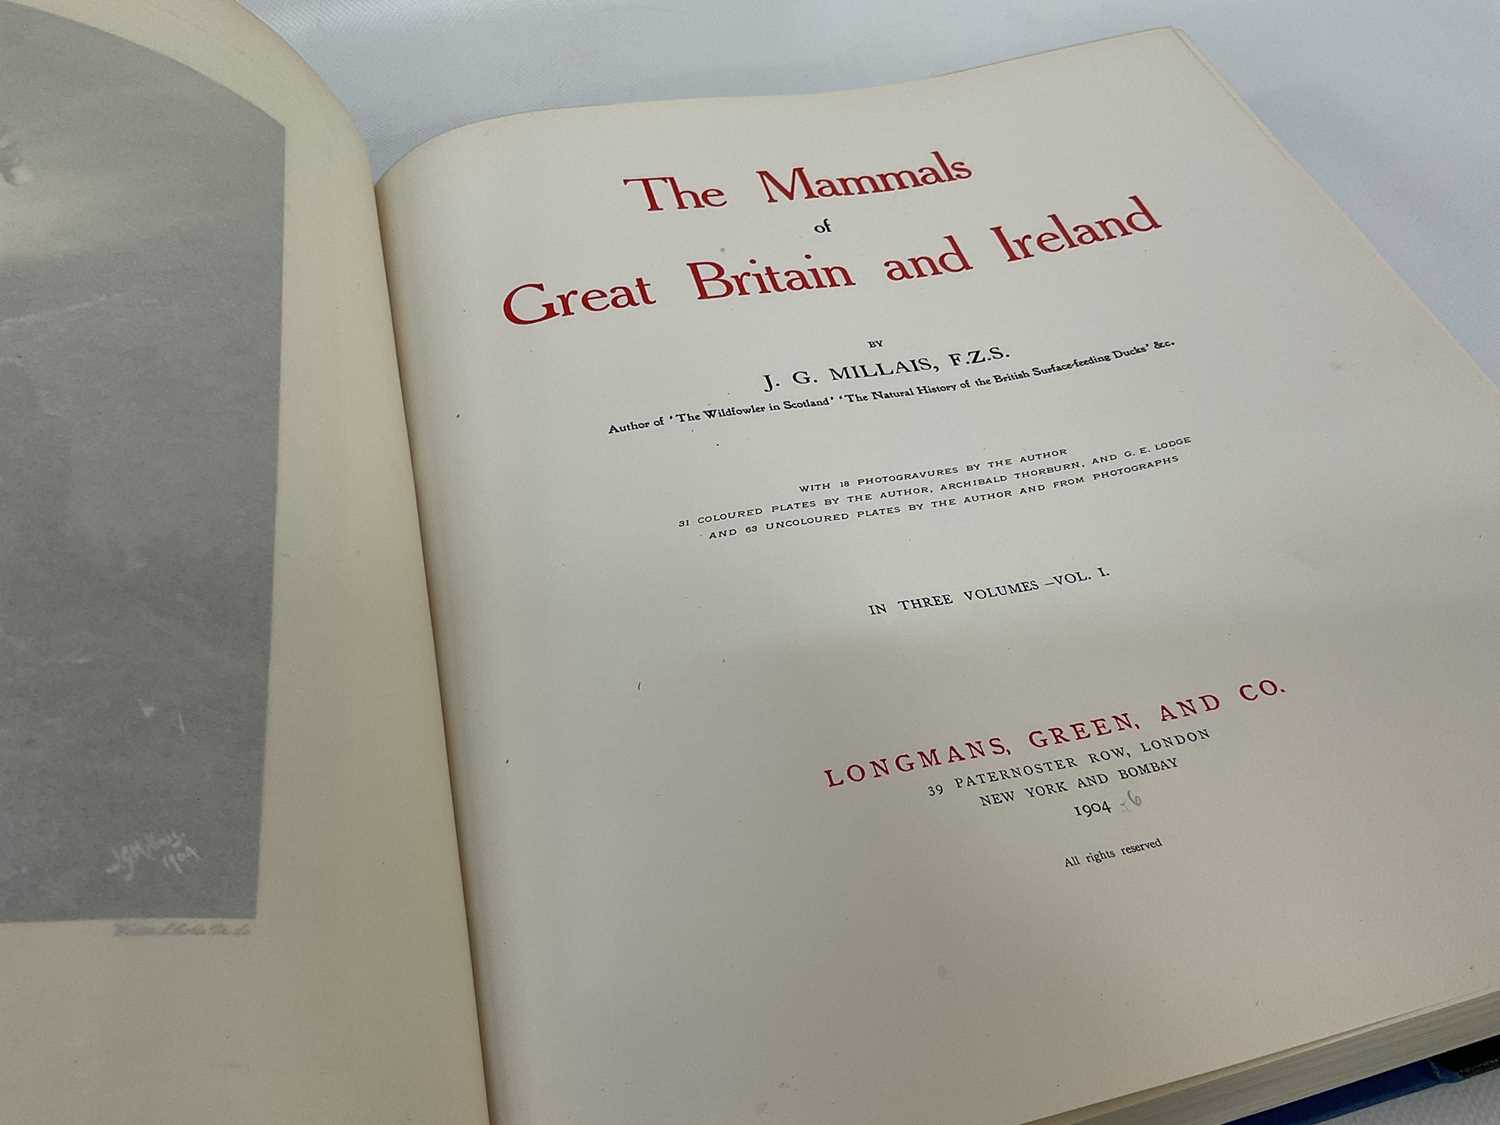 John Guille Millais - The Mammals of Great Britain and Ireland, 3 vols. 1905 first edition - Image 5 of 7